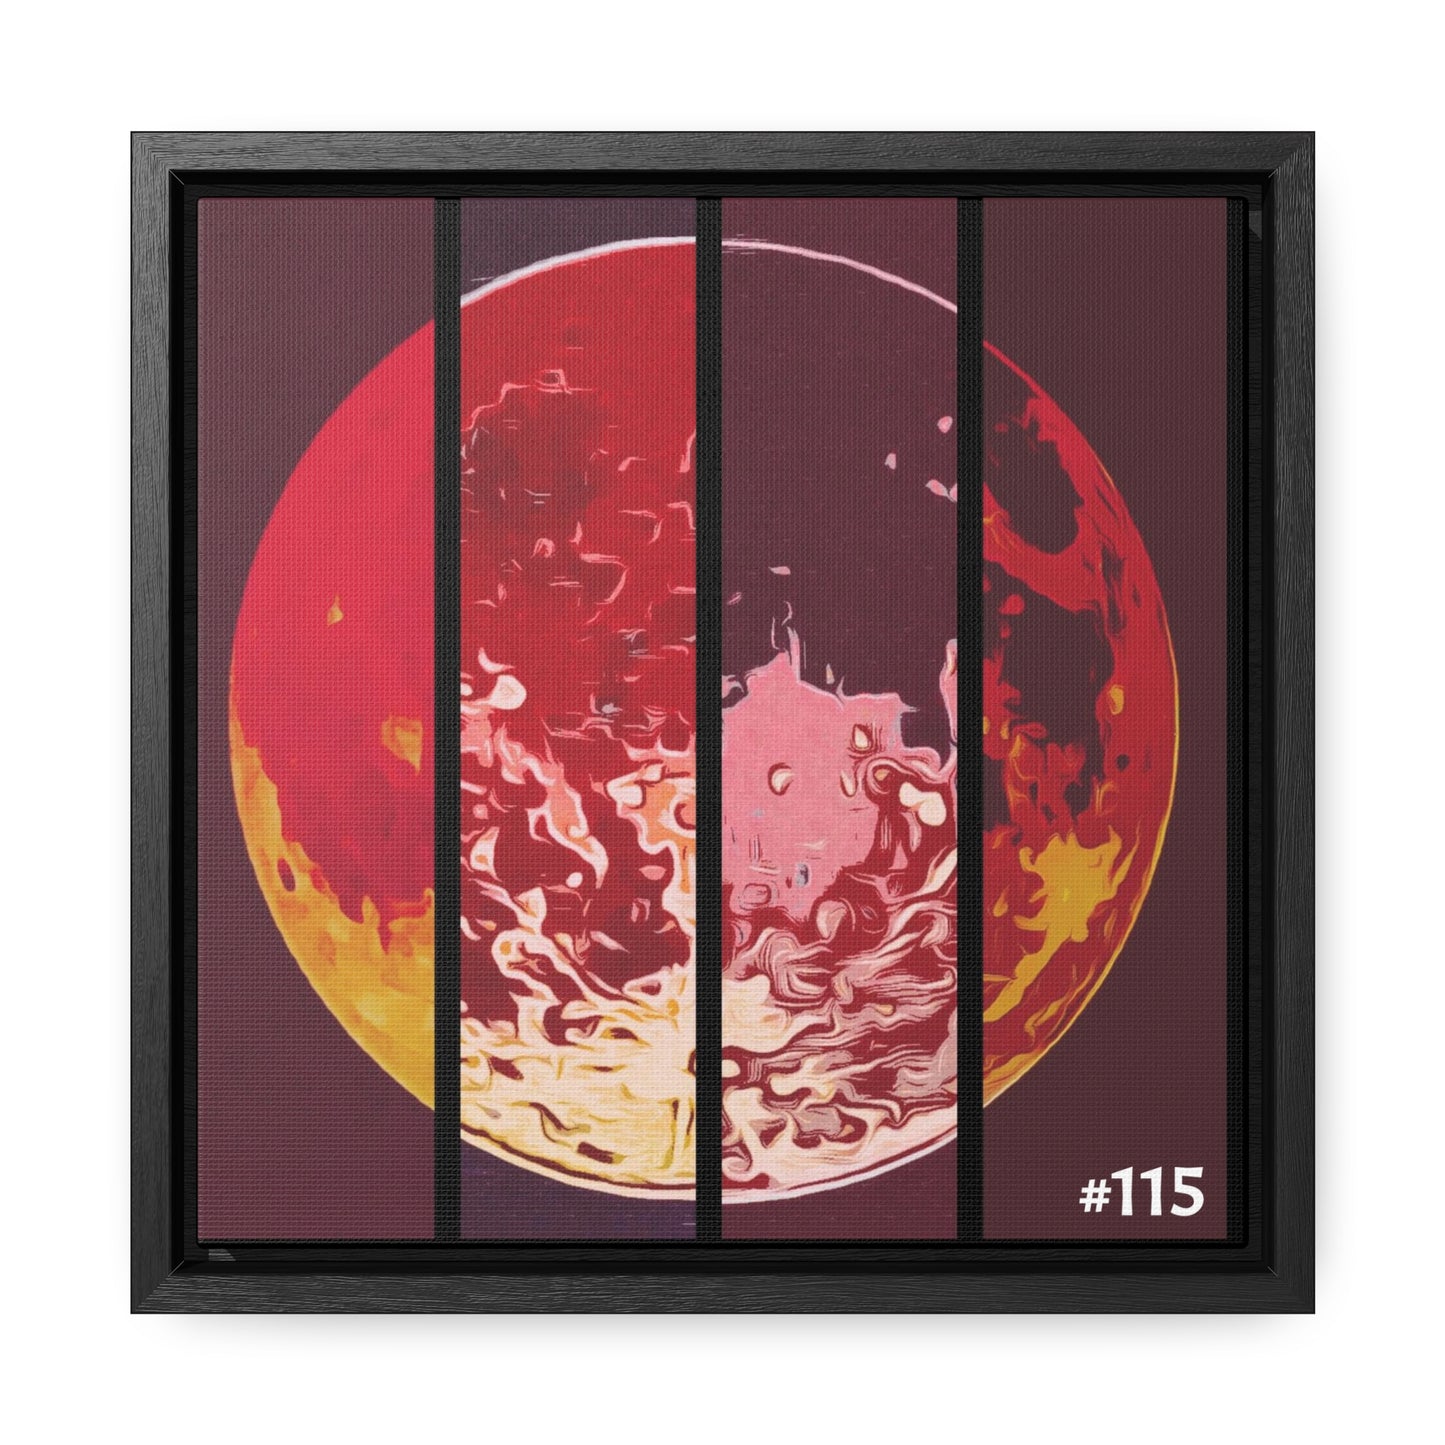 #115 - Made with Miracles Miniature Collectable Wood Framed Canvas Wall Art, 3 sizes available - 2018 Chinese Eclipse